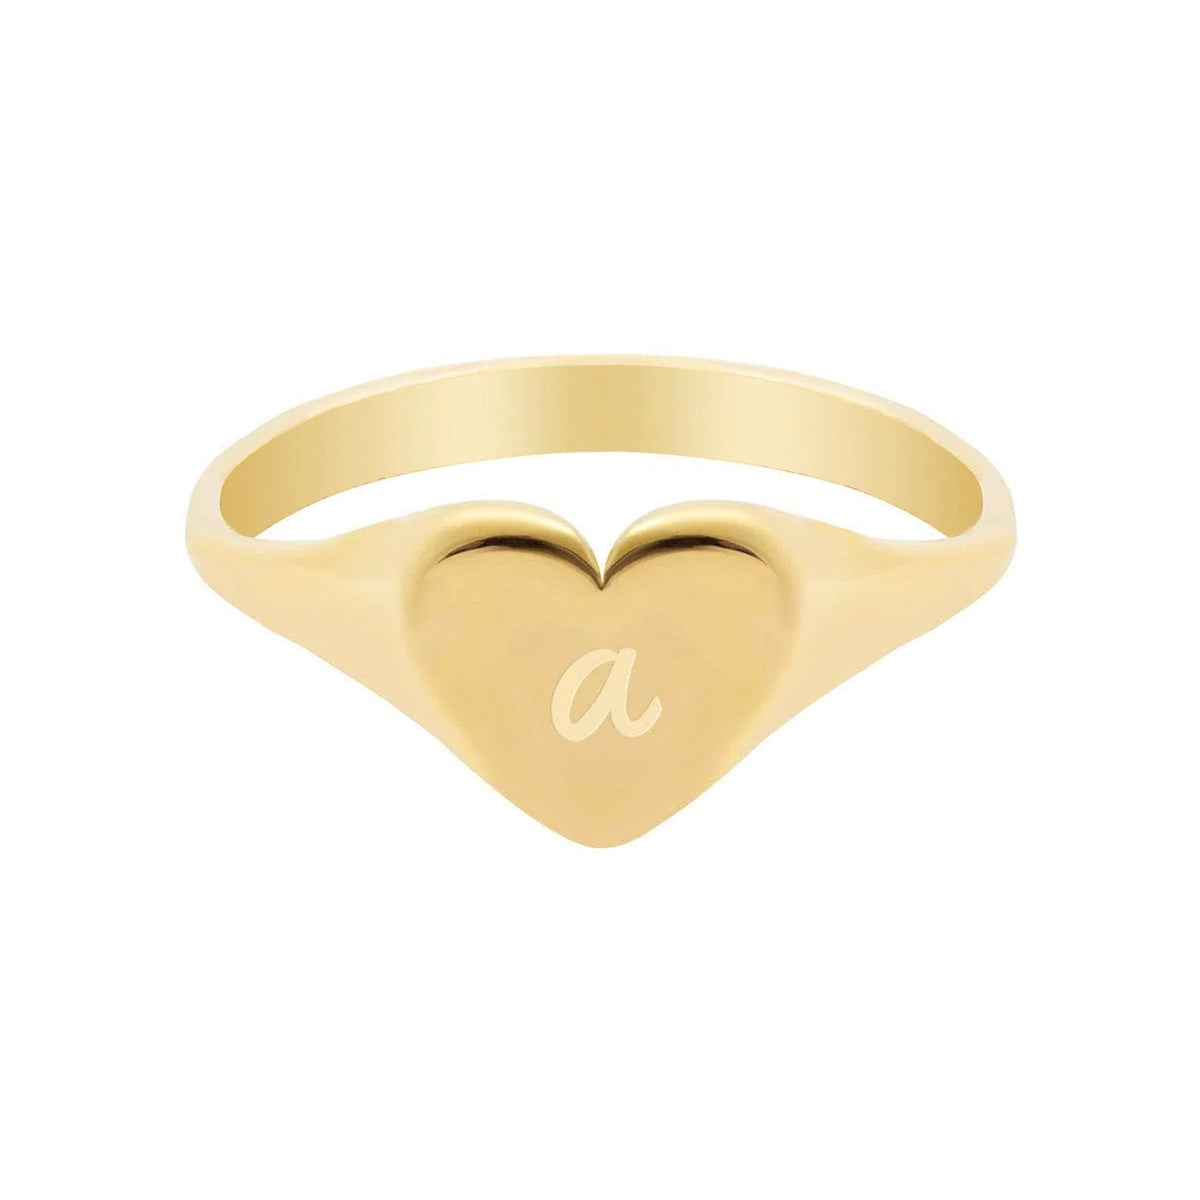 Bohomoon Stainless Steel In My Heart Initial Signet Ring